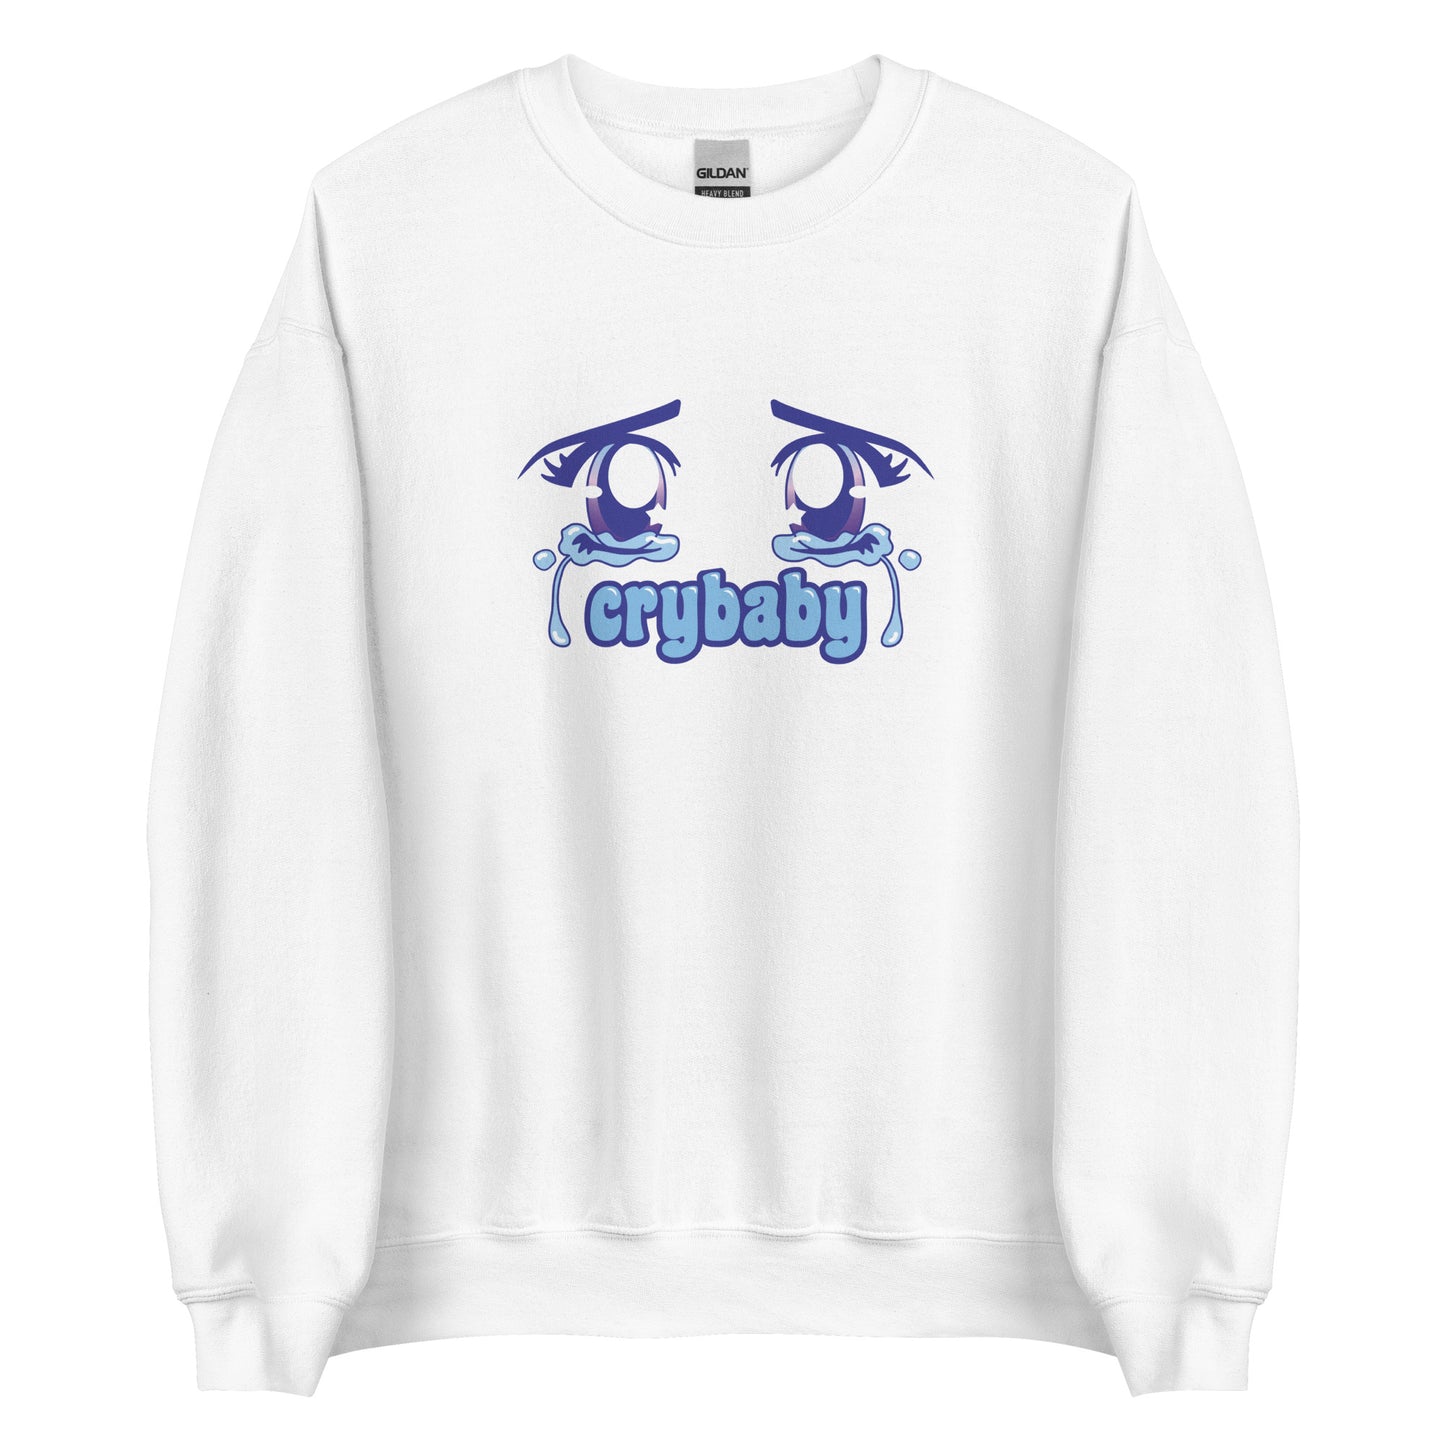 A white crewneck sweatshirt featuring large, sparkling purple anime eyes with tears streaming down. Text underneath the eyes in a rounded blue font reads "crybaby"